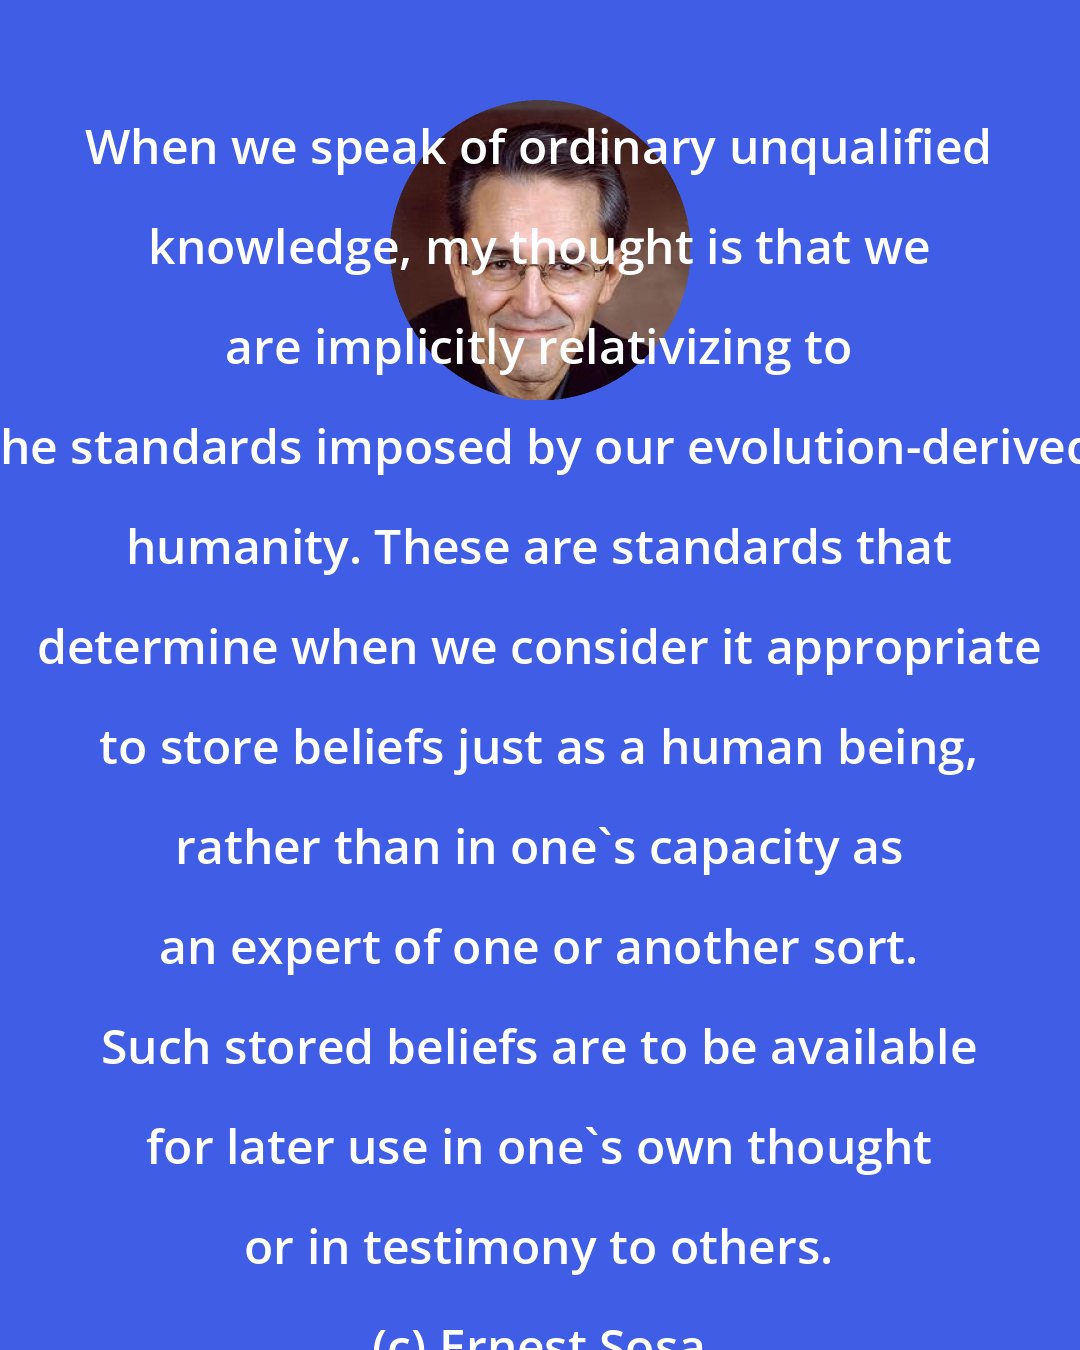 Ernest Sosa: When we speak of ordinary unqualified knowledge, my thought is that we are implicitly relativizing to the standards imposed by our evolution-derived humanity. These are standards that determine when we consider it appropriate to store beliefs just as a human being, rather than in one's capacity as an expert of one or another sort. Such stored beliefs are to be available for later use in one's own thought or in testimony to others.